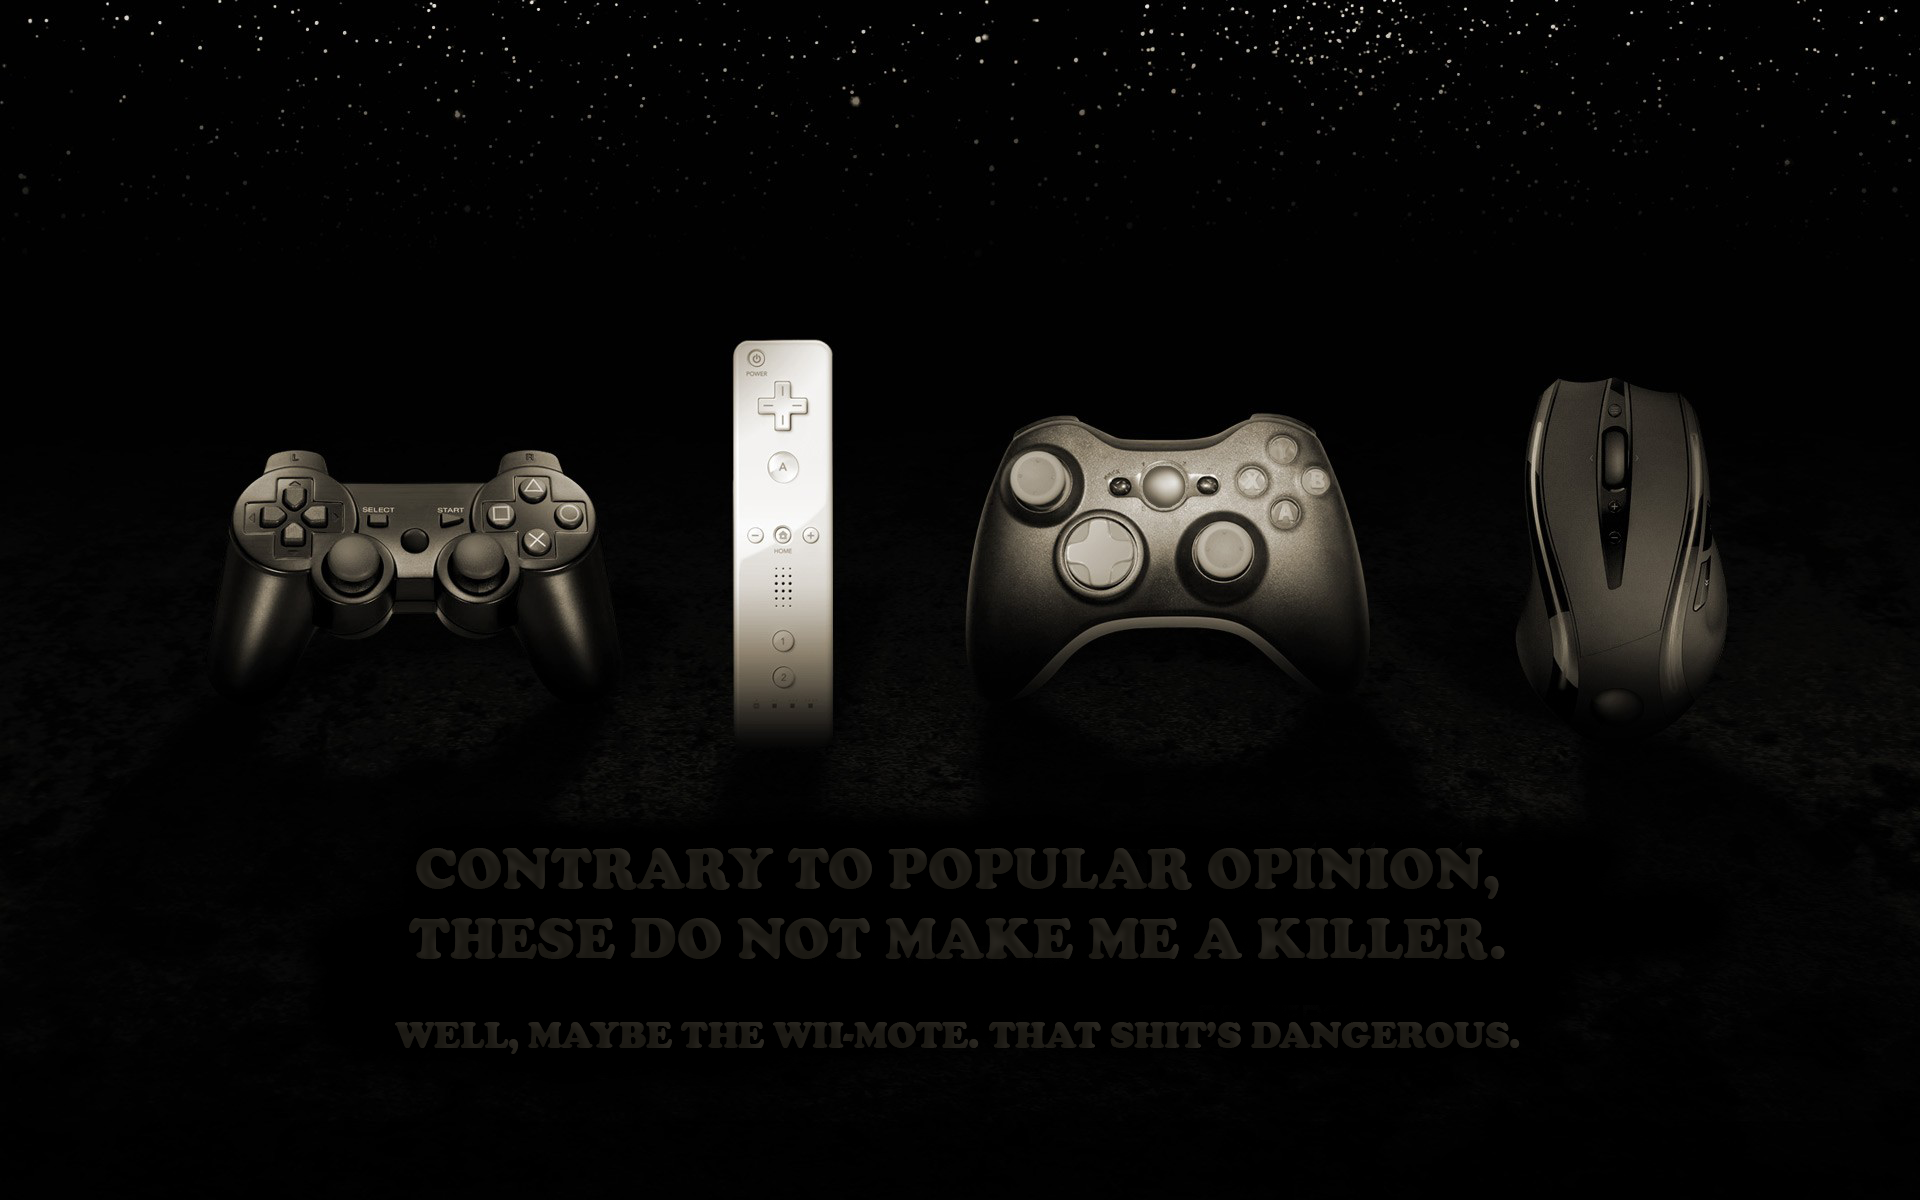 General 1920x1200 consoles video games humor sepia controllers DualShock DualShock 3 quote PC gaming computer mice PlayStation X-Box Wii simple background black background